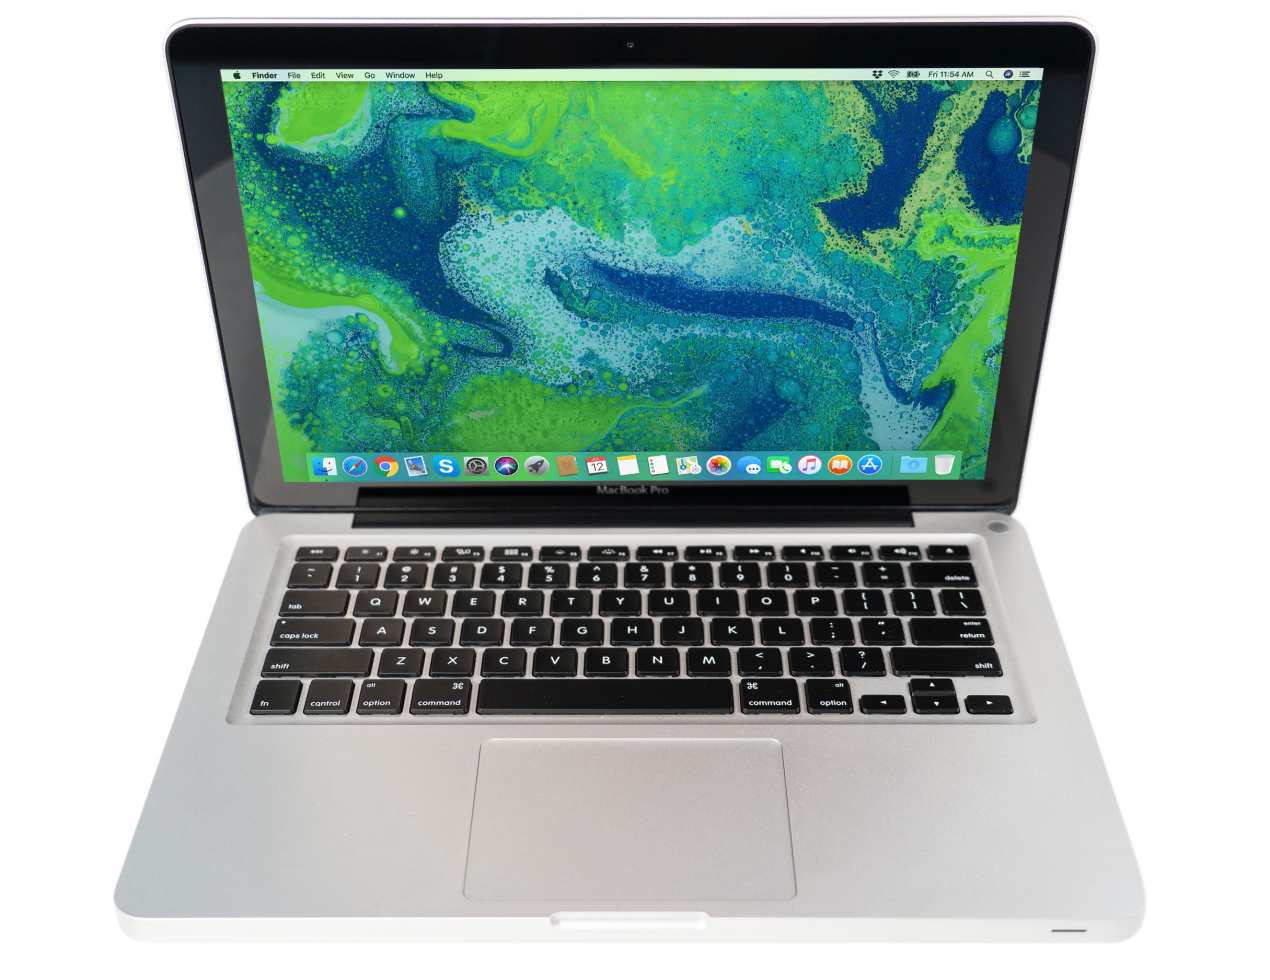 Refurbished & Used MacBook Pro 2012 for Sale | 15 inch & 13 inch MBP